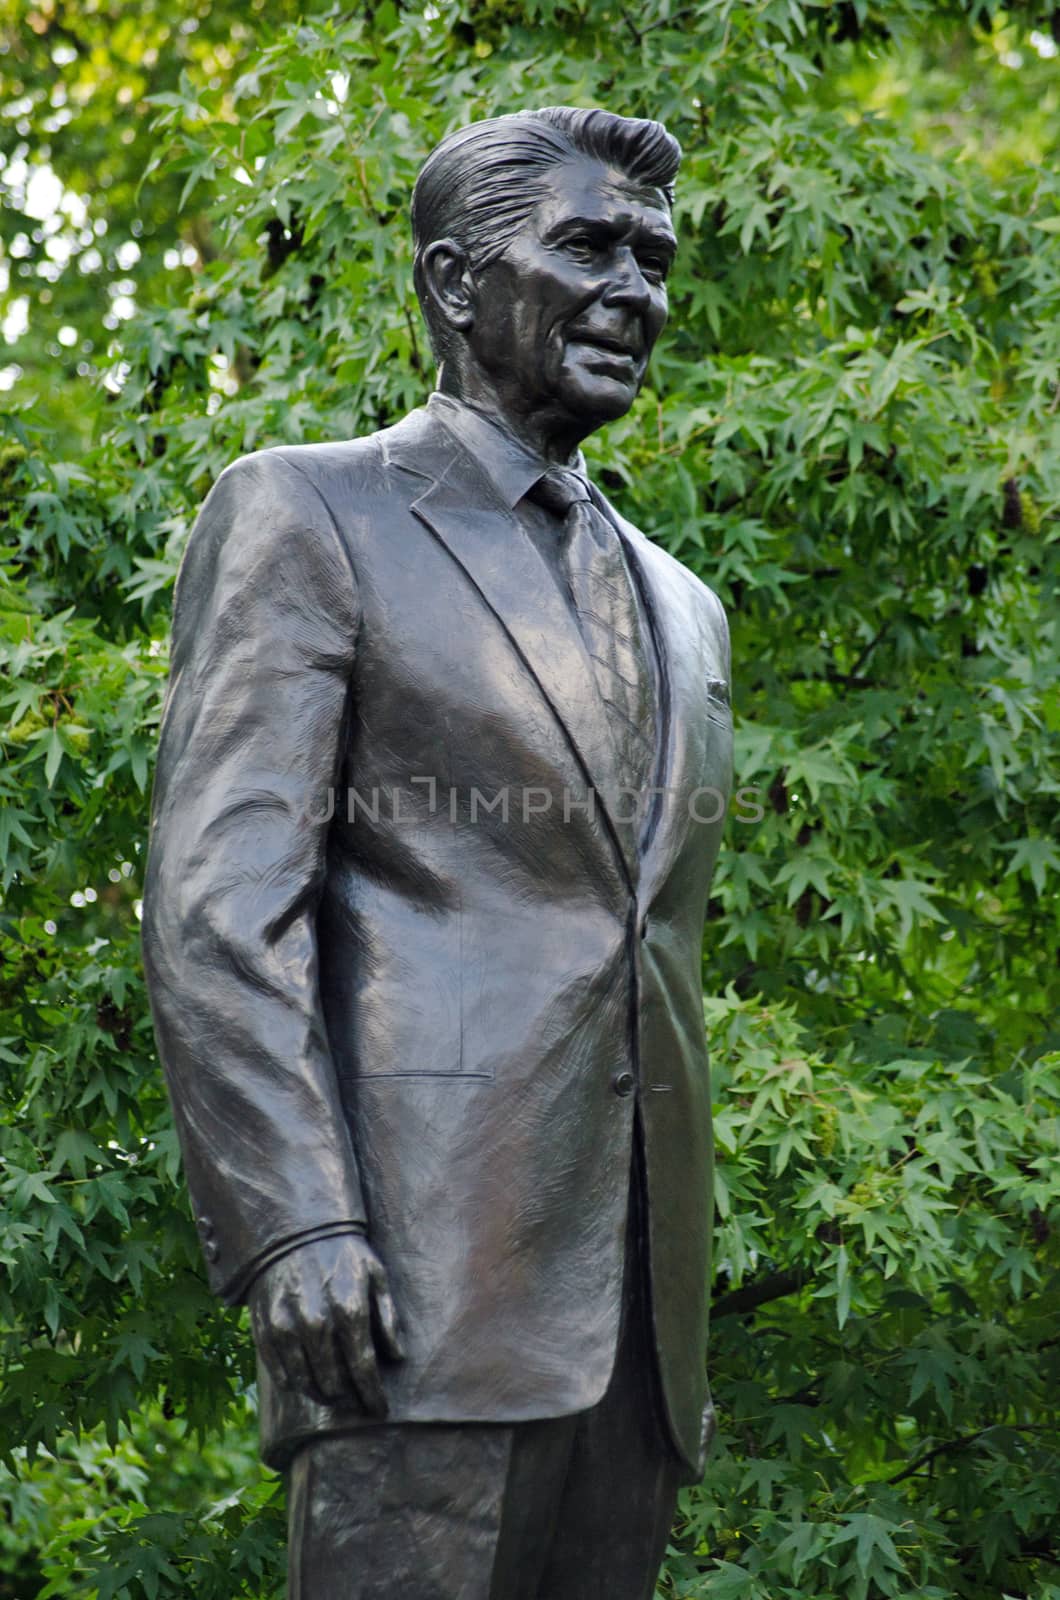 LONDON, UK - JULY 25, 2017:  Memorial statue of President Ronald Reagan in Grosvenor Square, Mayfair, London.  Created by American sculptor Chas Fagan it has been on public display since 2011.  